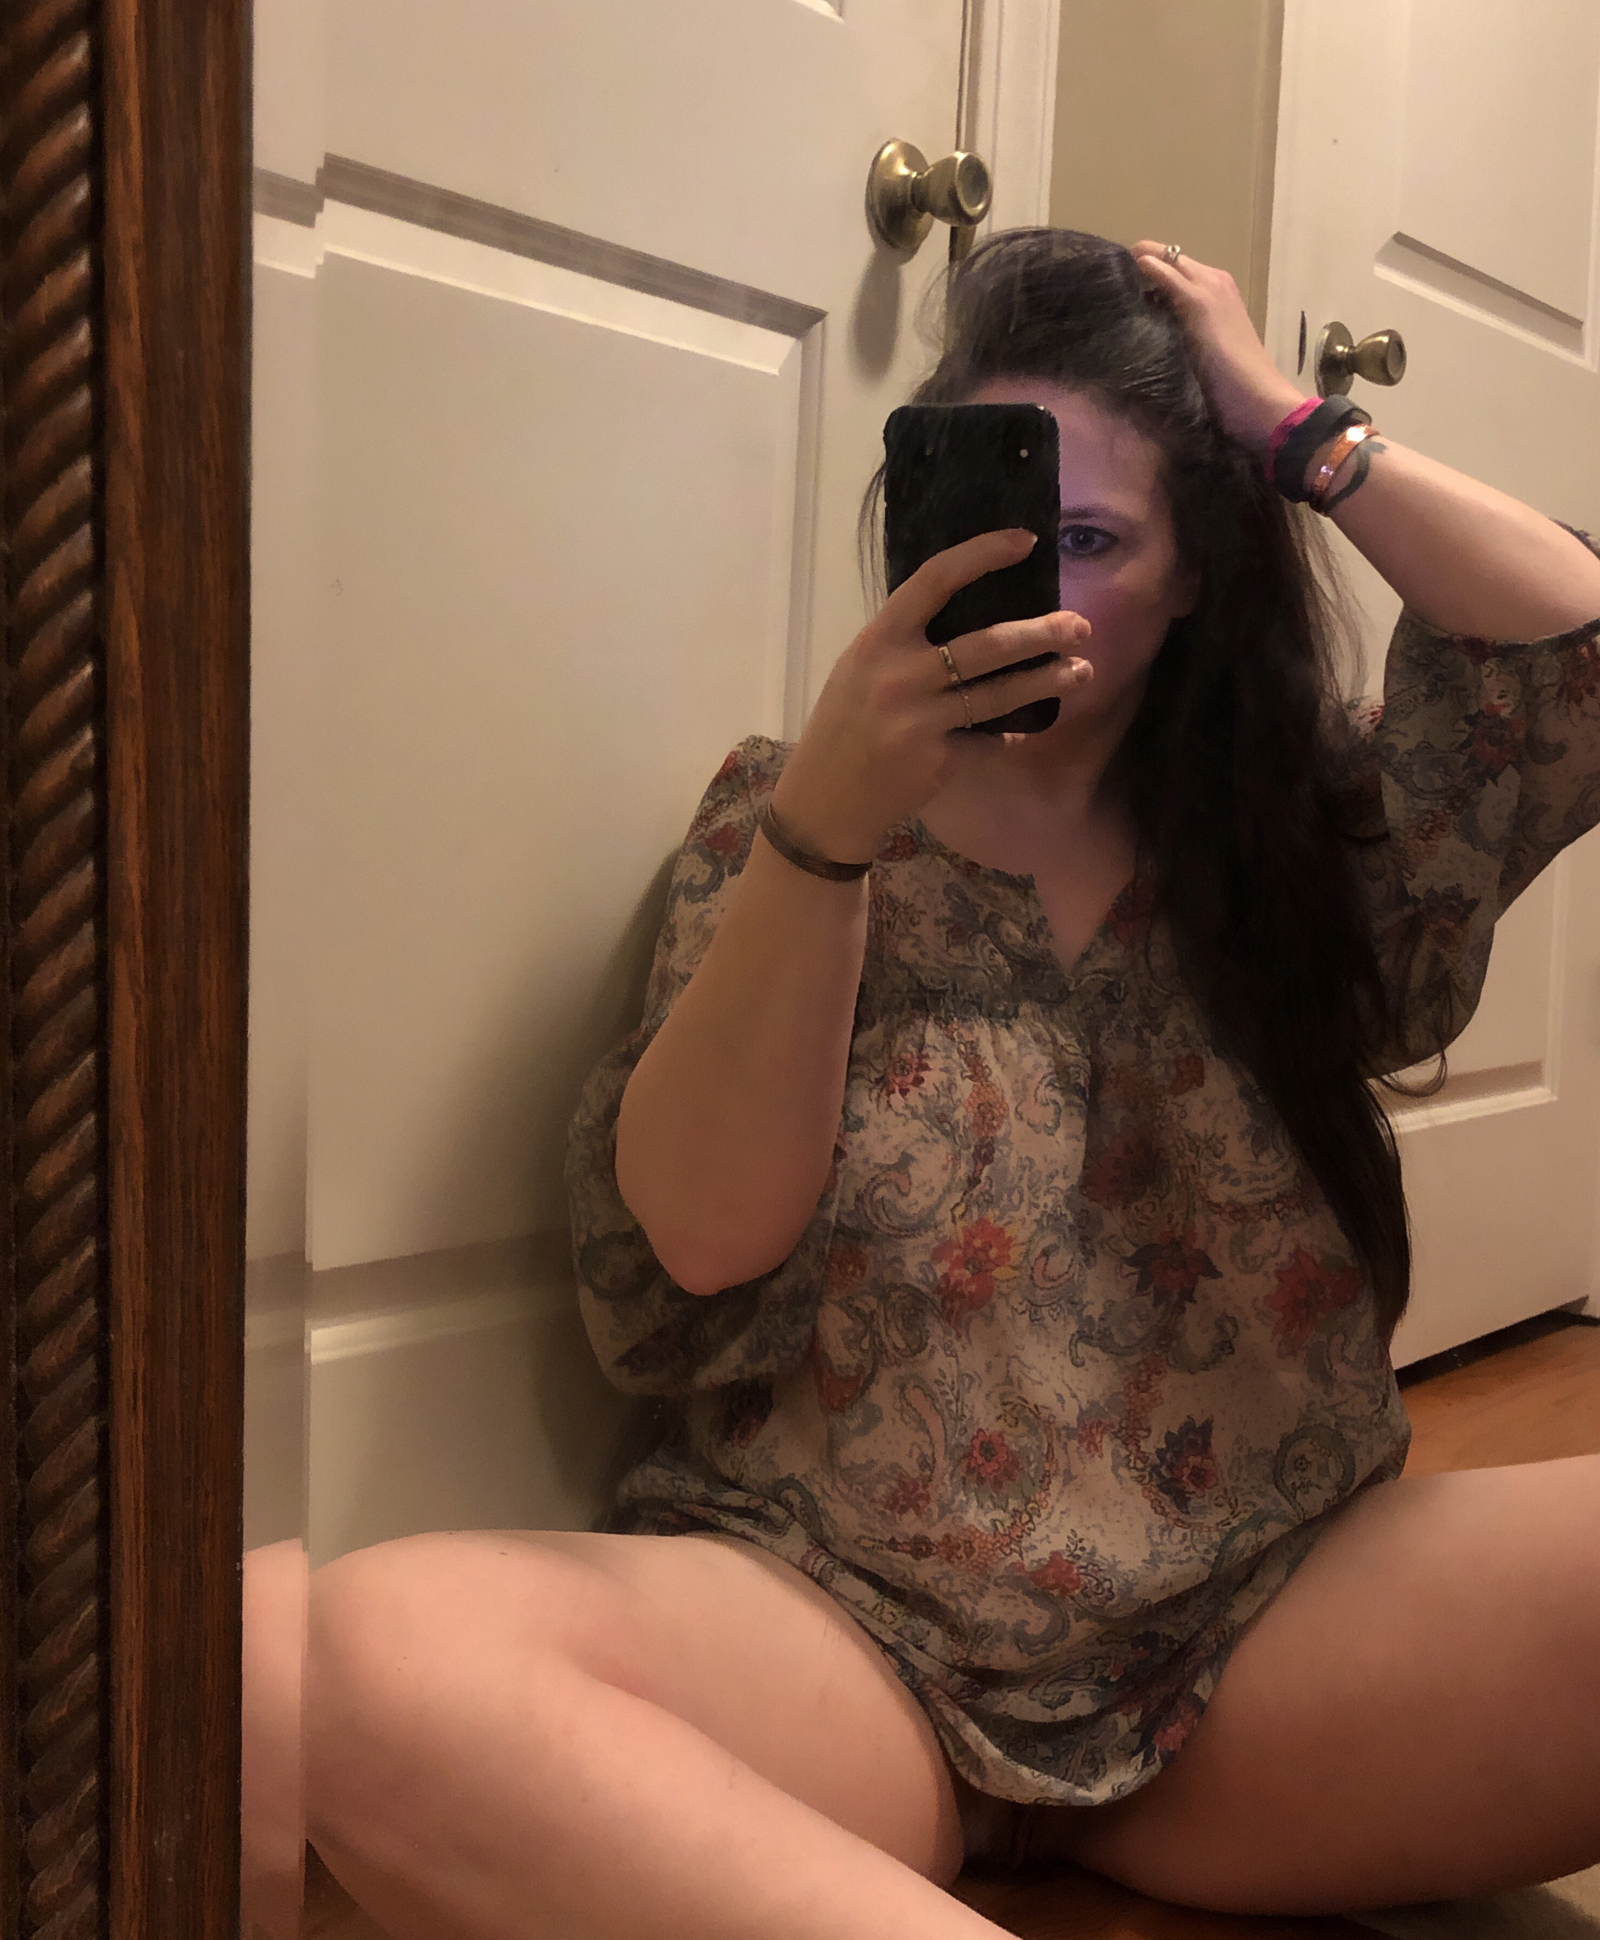 Photo by Paisley with the username @paisley80, who is a star user,  August 14, 2019 at 5:45 PM. The post is about the topic MILF